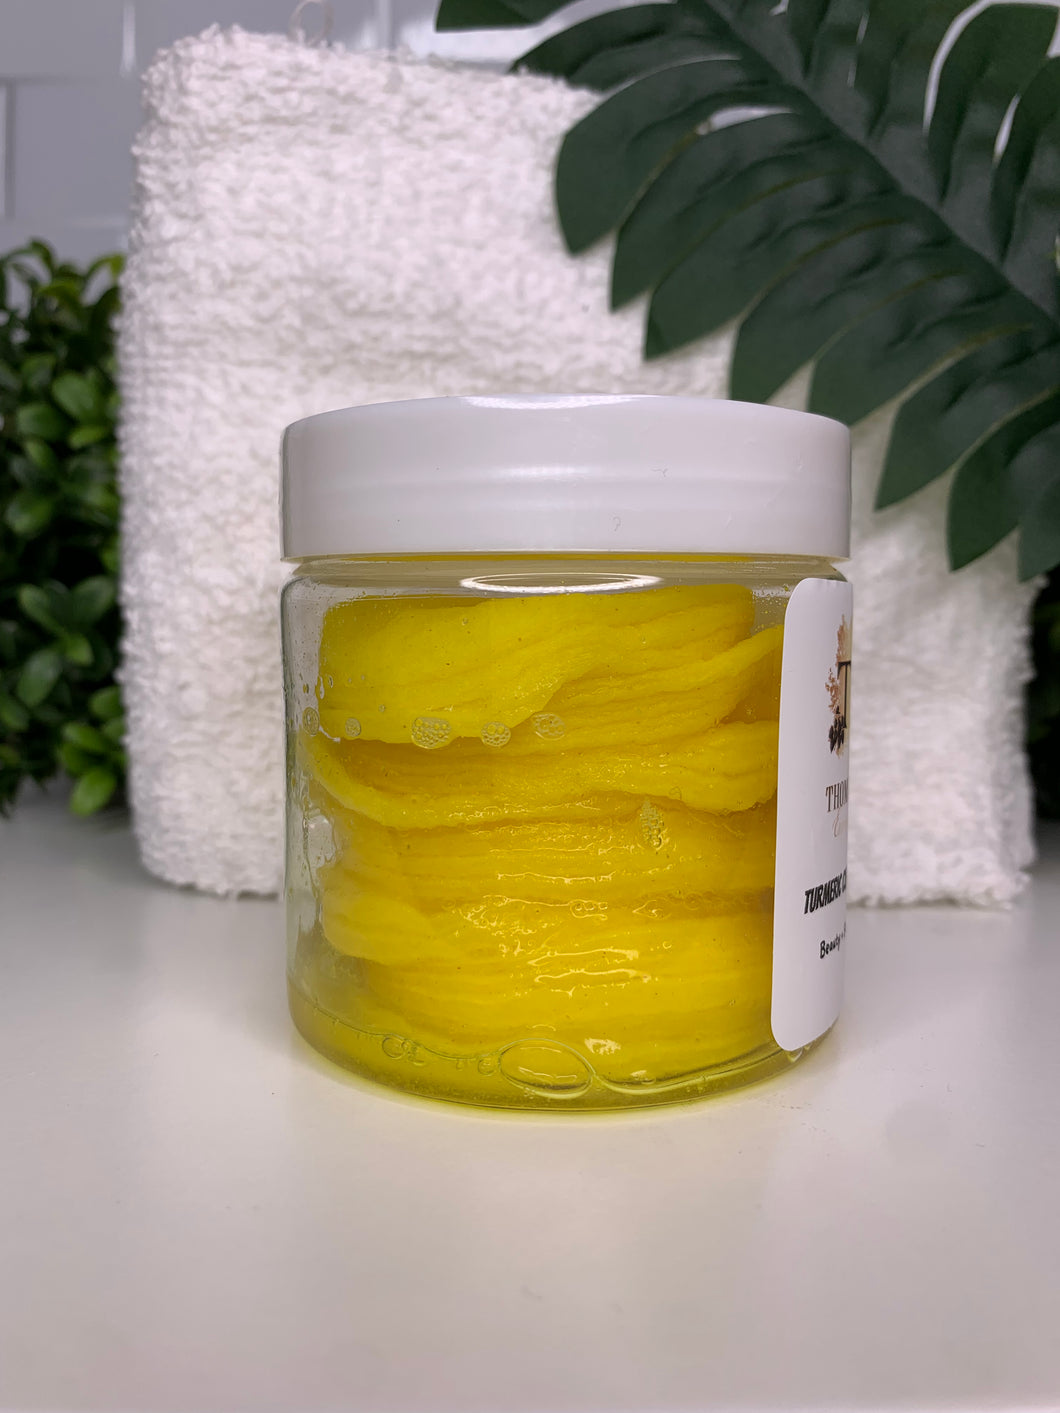 Turmeric cleansing pads